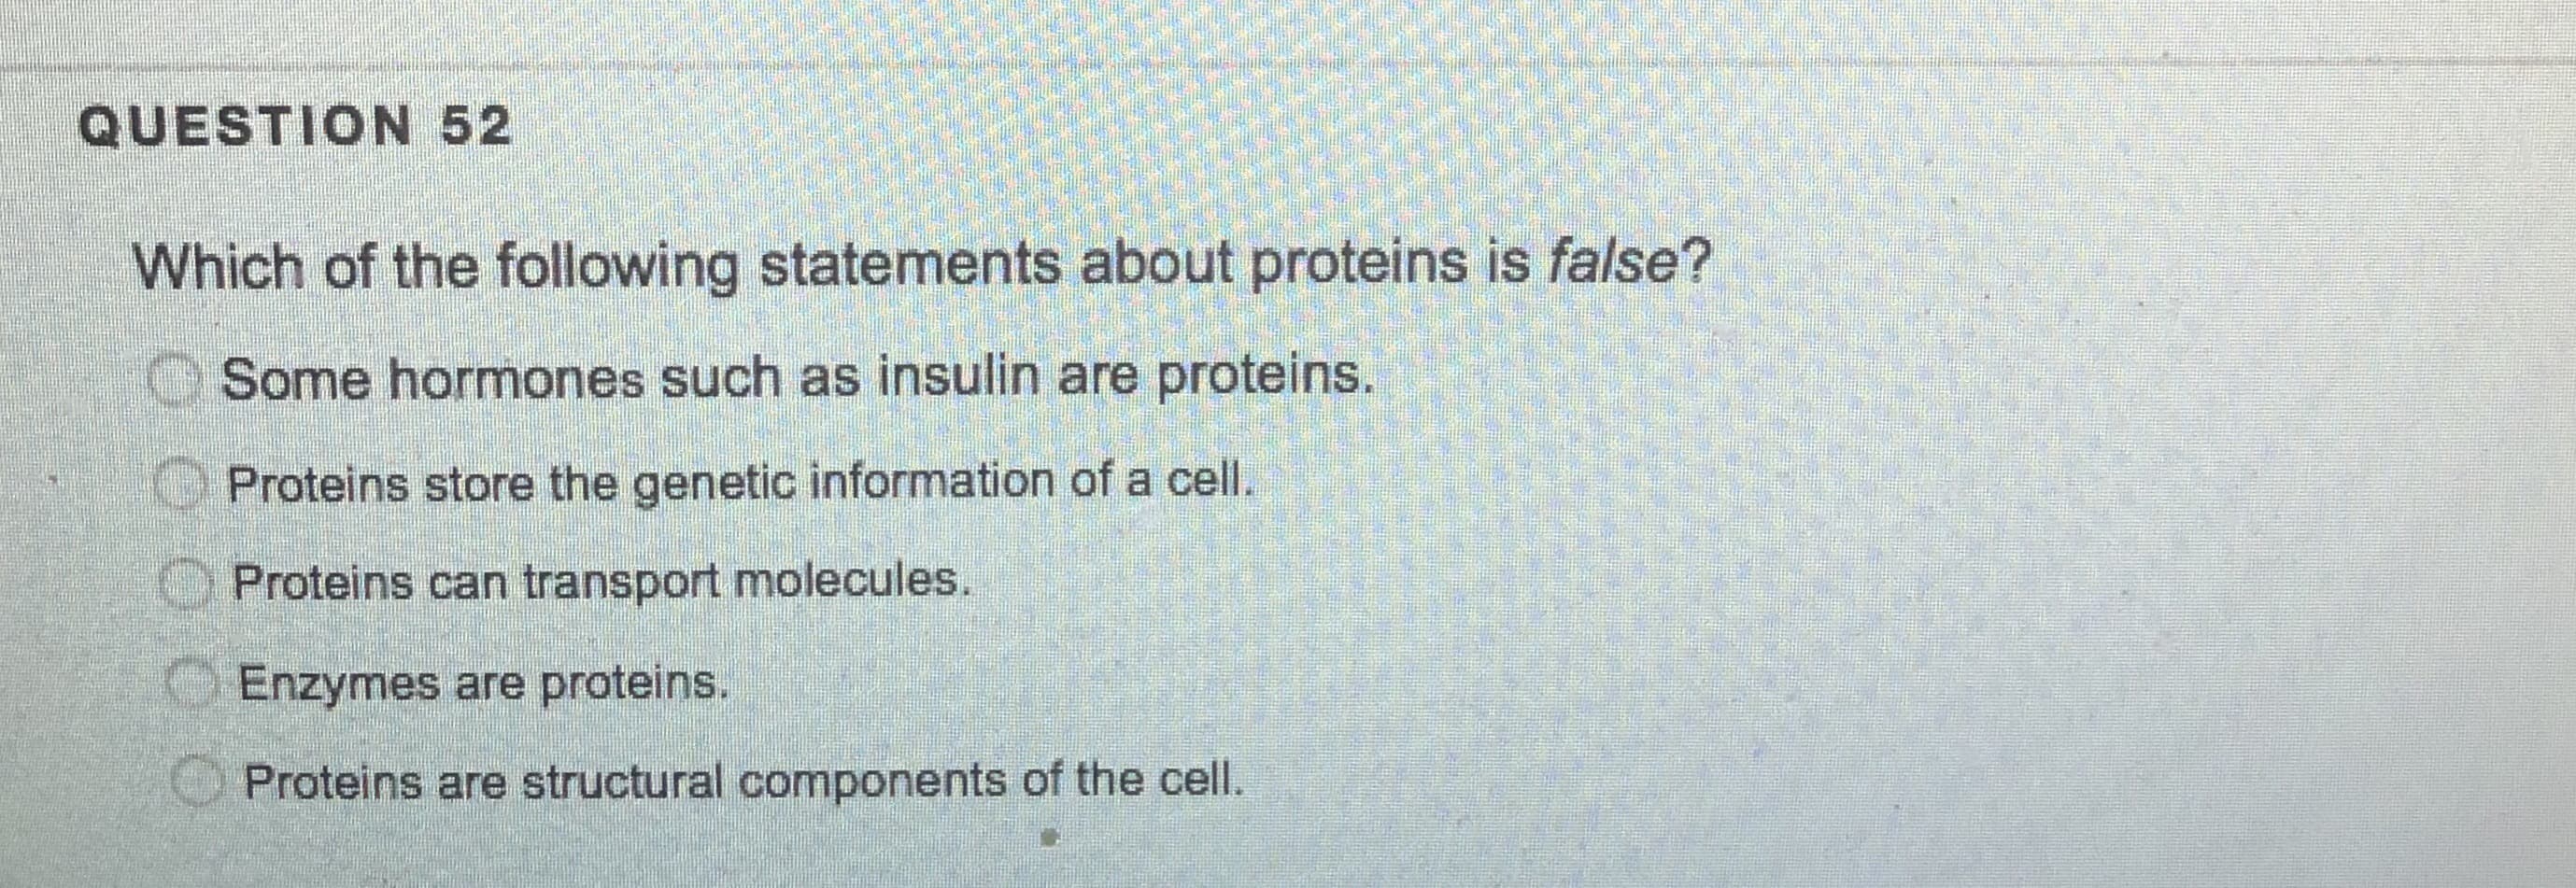 Which of the following statements about proteins is false?
O Some hormones such as insulin are proteins.
Proteins store the genetic information of a cell.
O Proteins can transport molecules.
O Enzymes are proteins.
Proteins are structural components of the cell.
